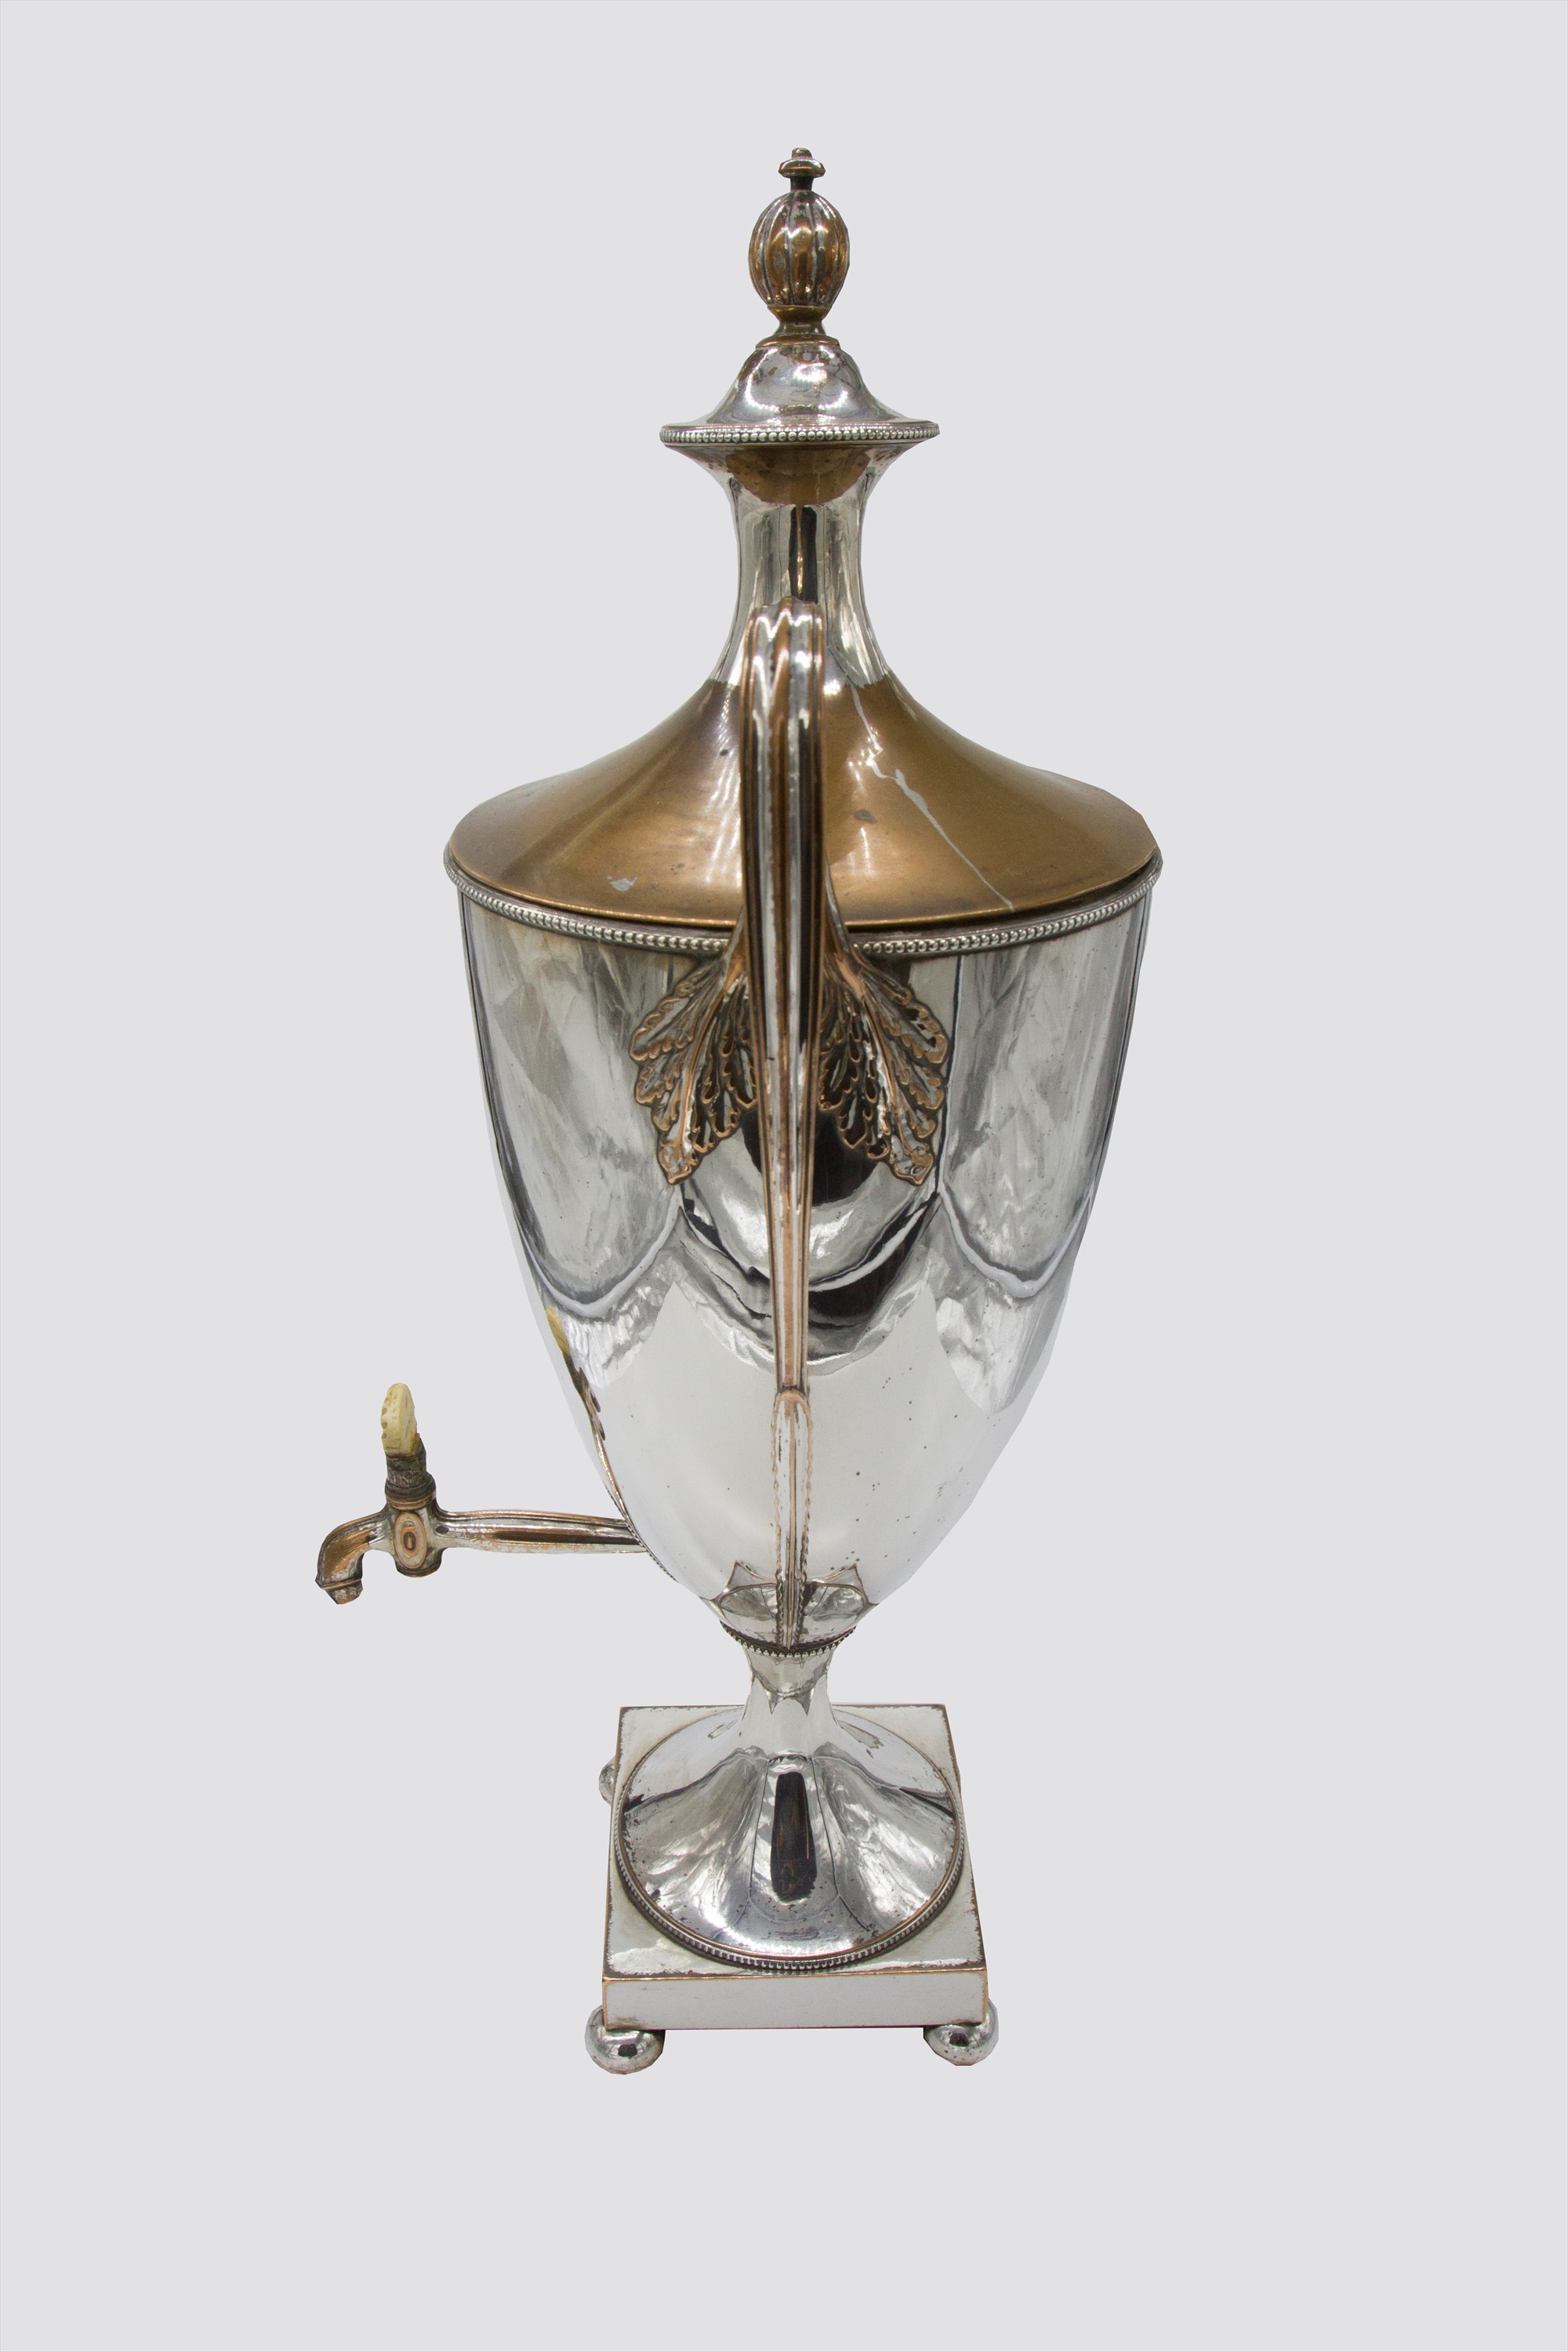 A George III Adam period silver plated tea urn. (Dimensions: Height 59cm.)(Height 59cm.) - Image 2 of 2